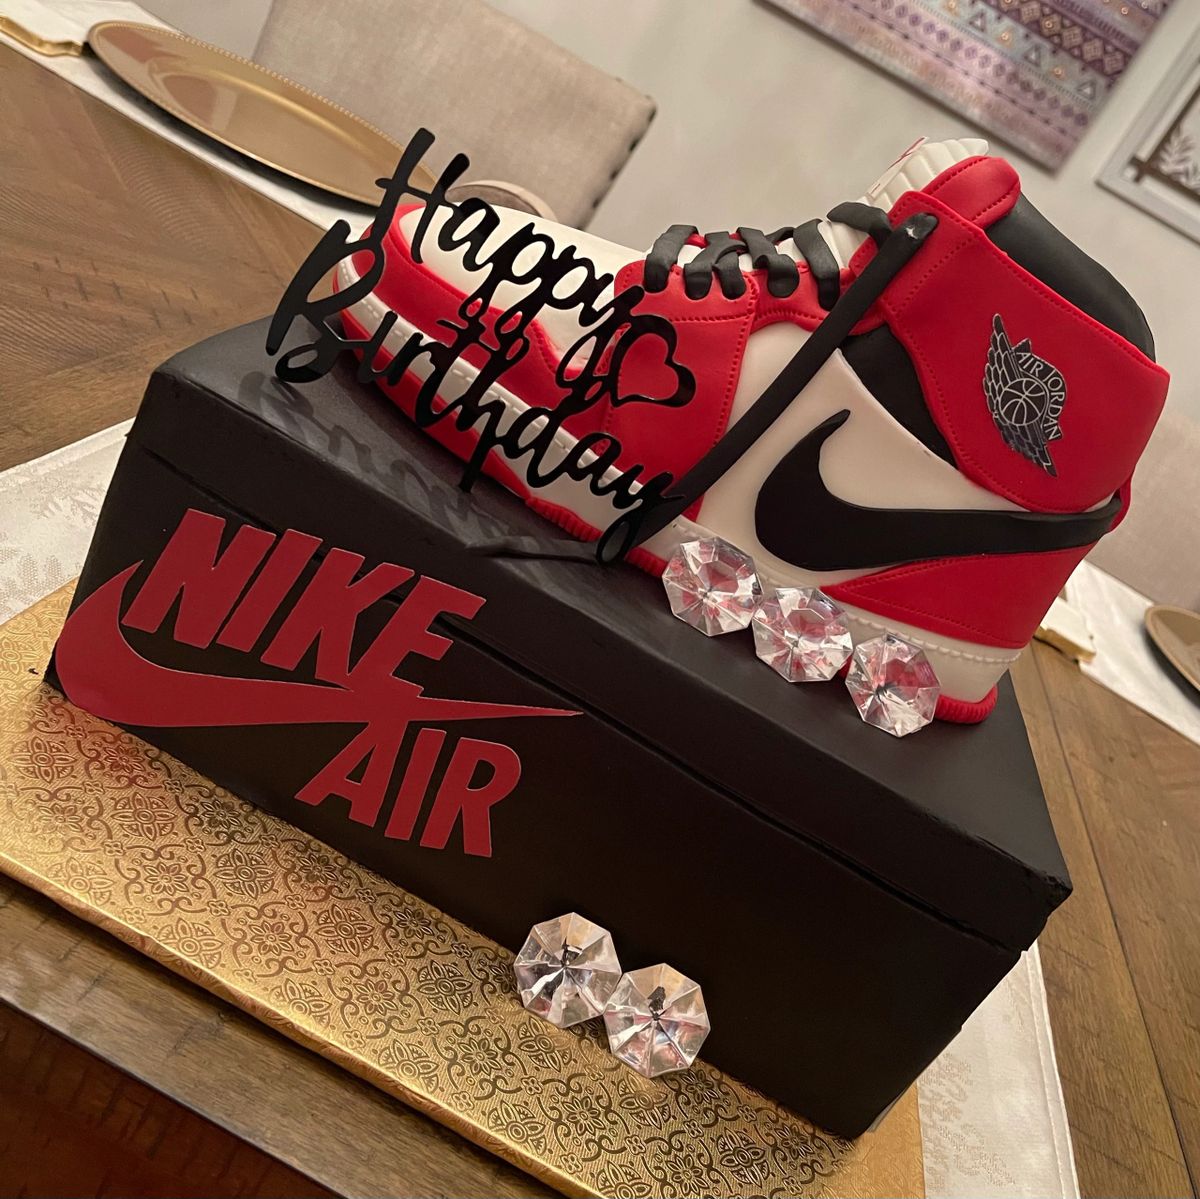 Nike shoe box - Decorated Cake by Cherry on Top Cakes - CakesDecor